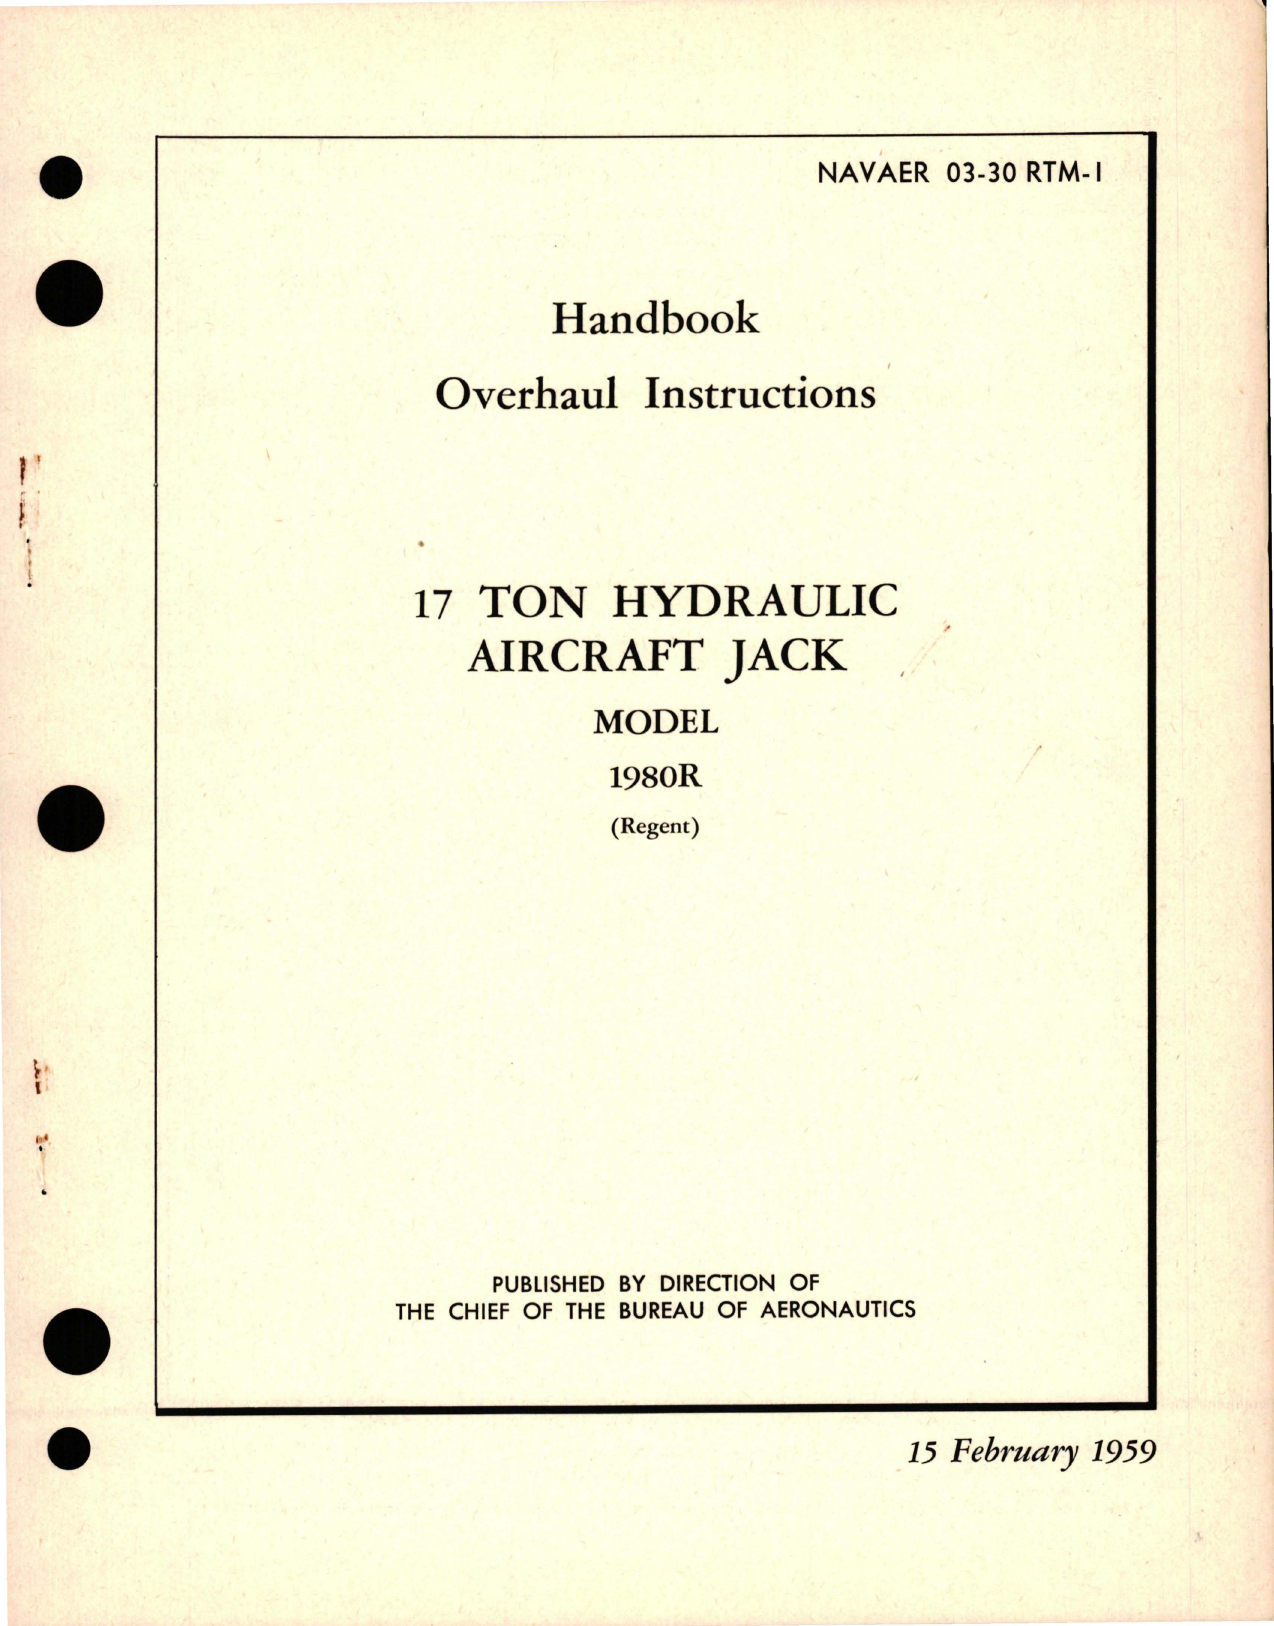 Sample page 1 from AirCorps Library document: Overhaul Instructions for 17 Ton Hydraulic Aircraft Jack - Model 1980R